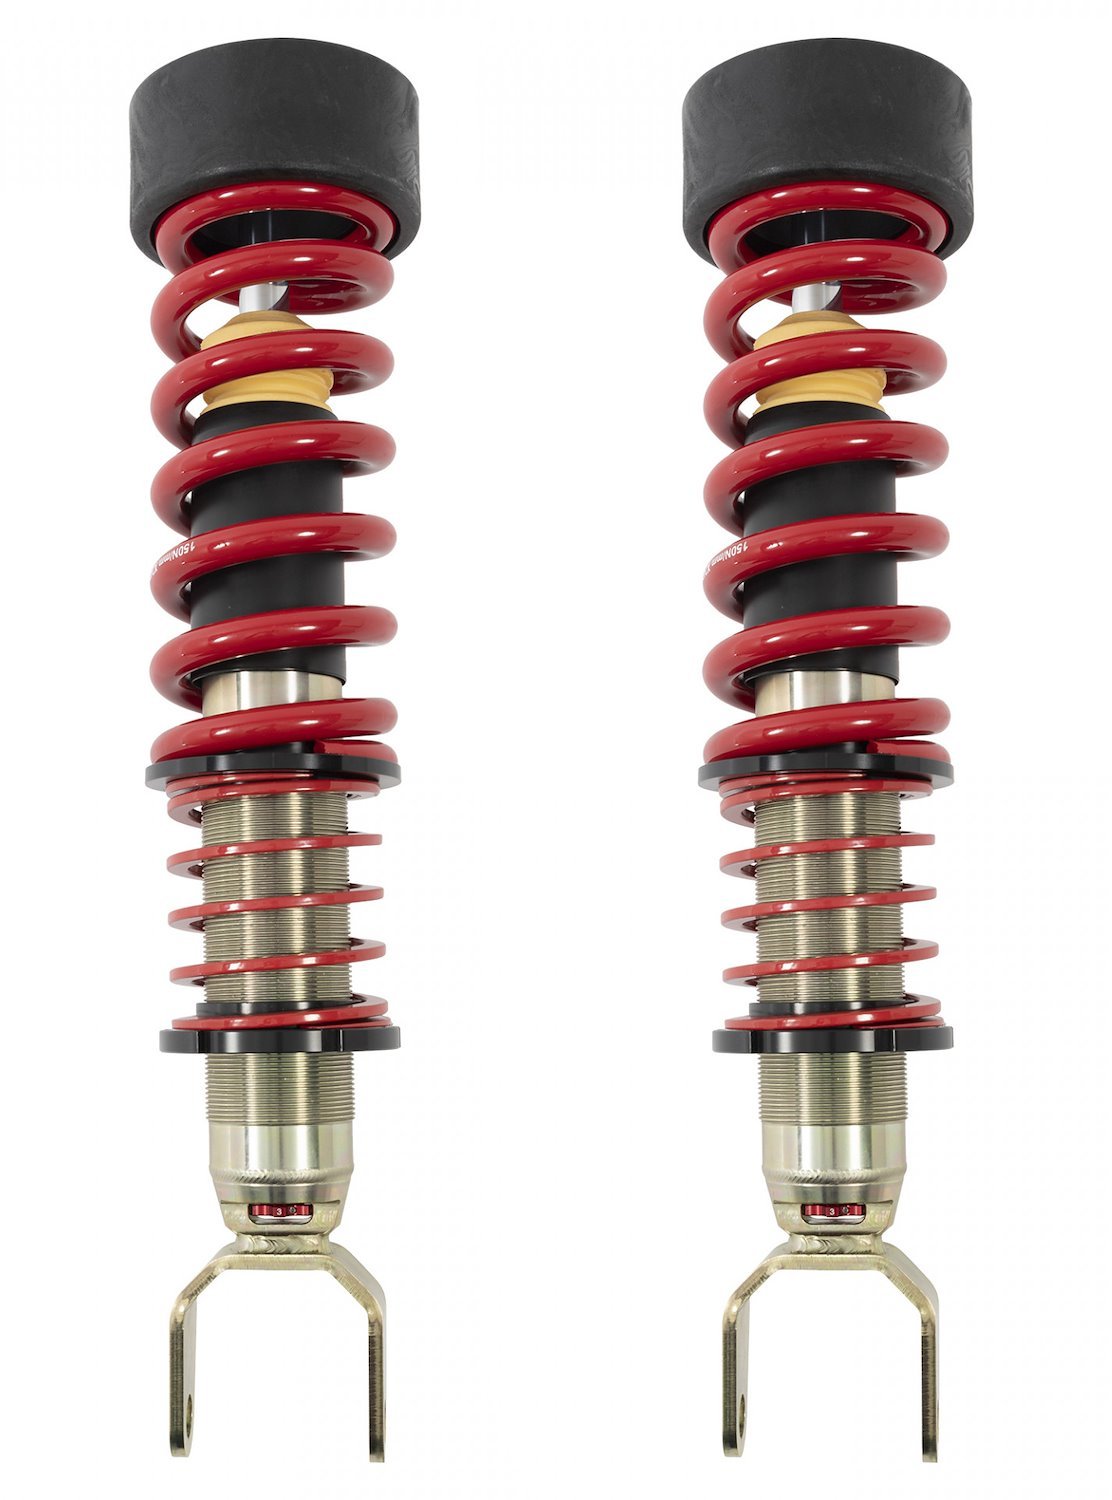 Street Performance Front Coilover Lowering Kit fits Select